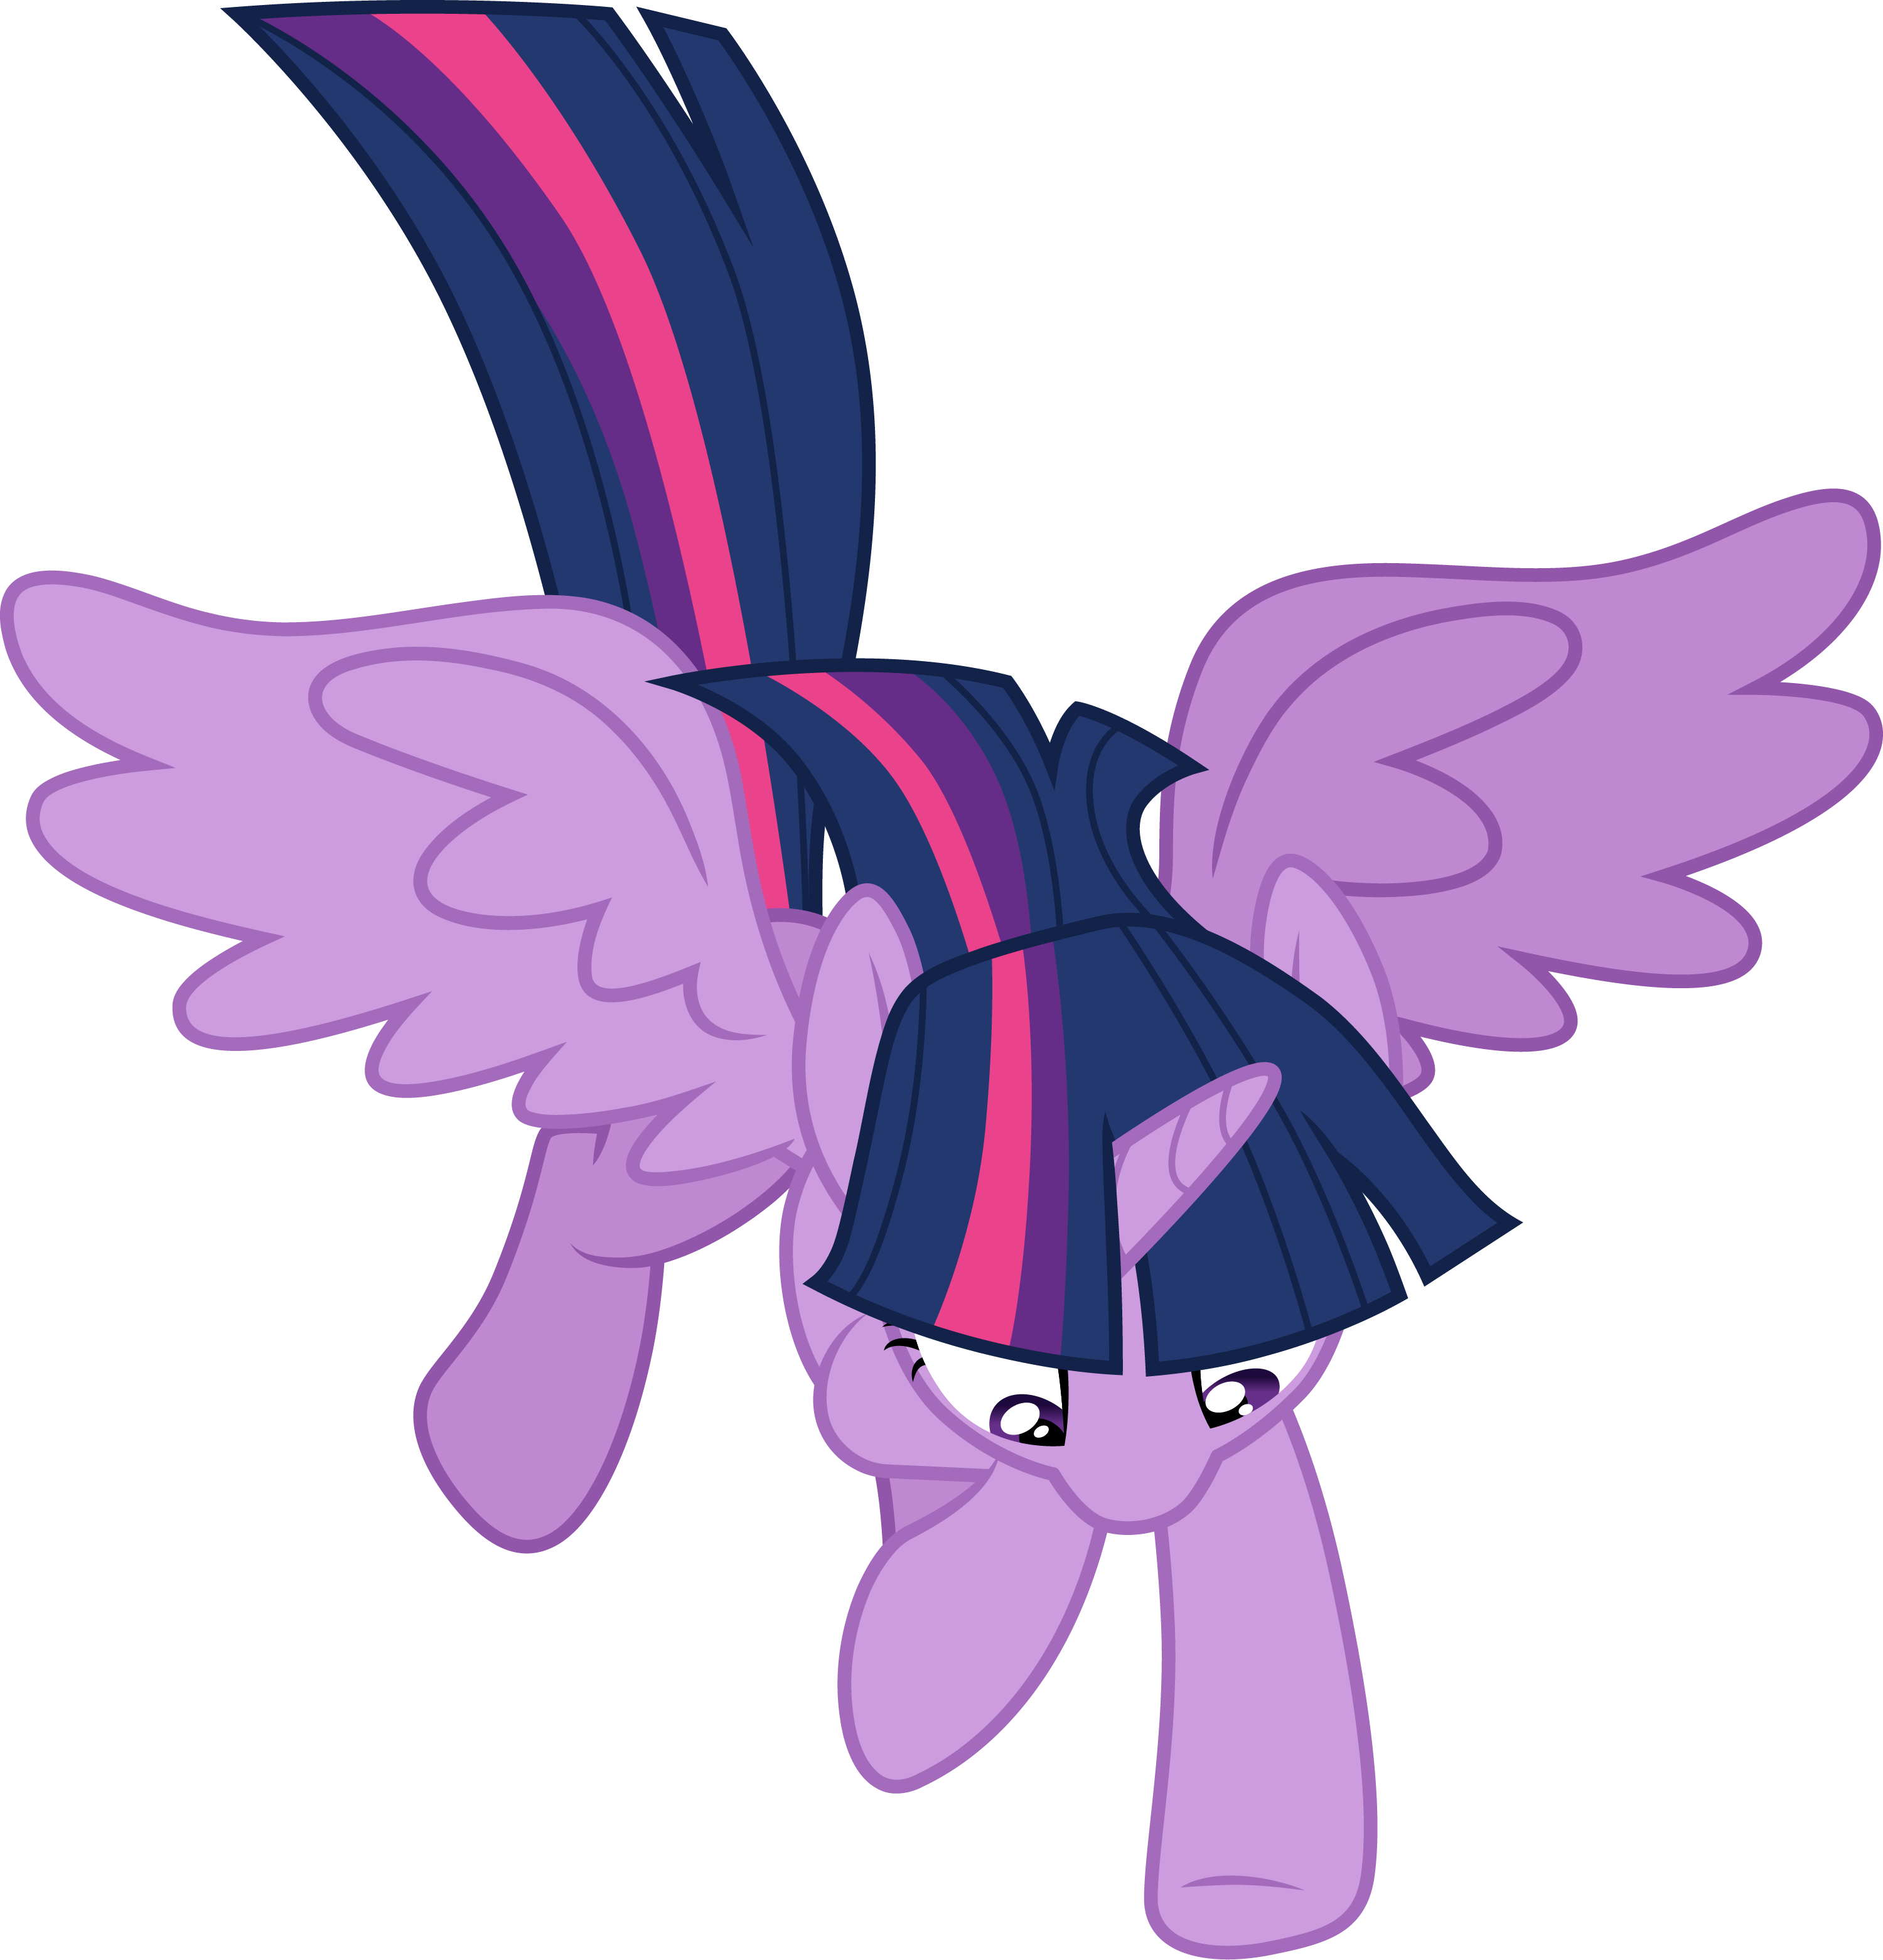 Twilight Sparkle is excited 2 by CloudyGlow on DeviantArt